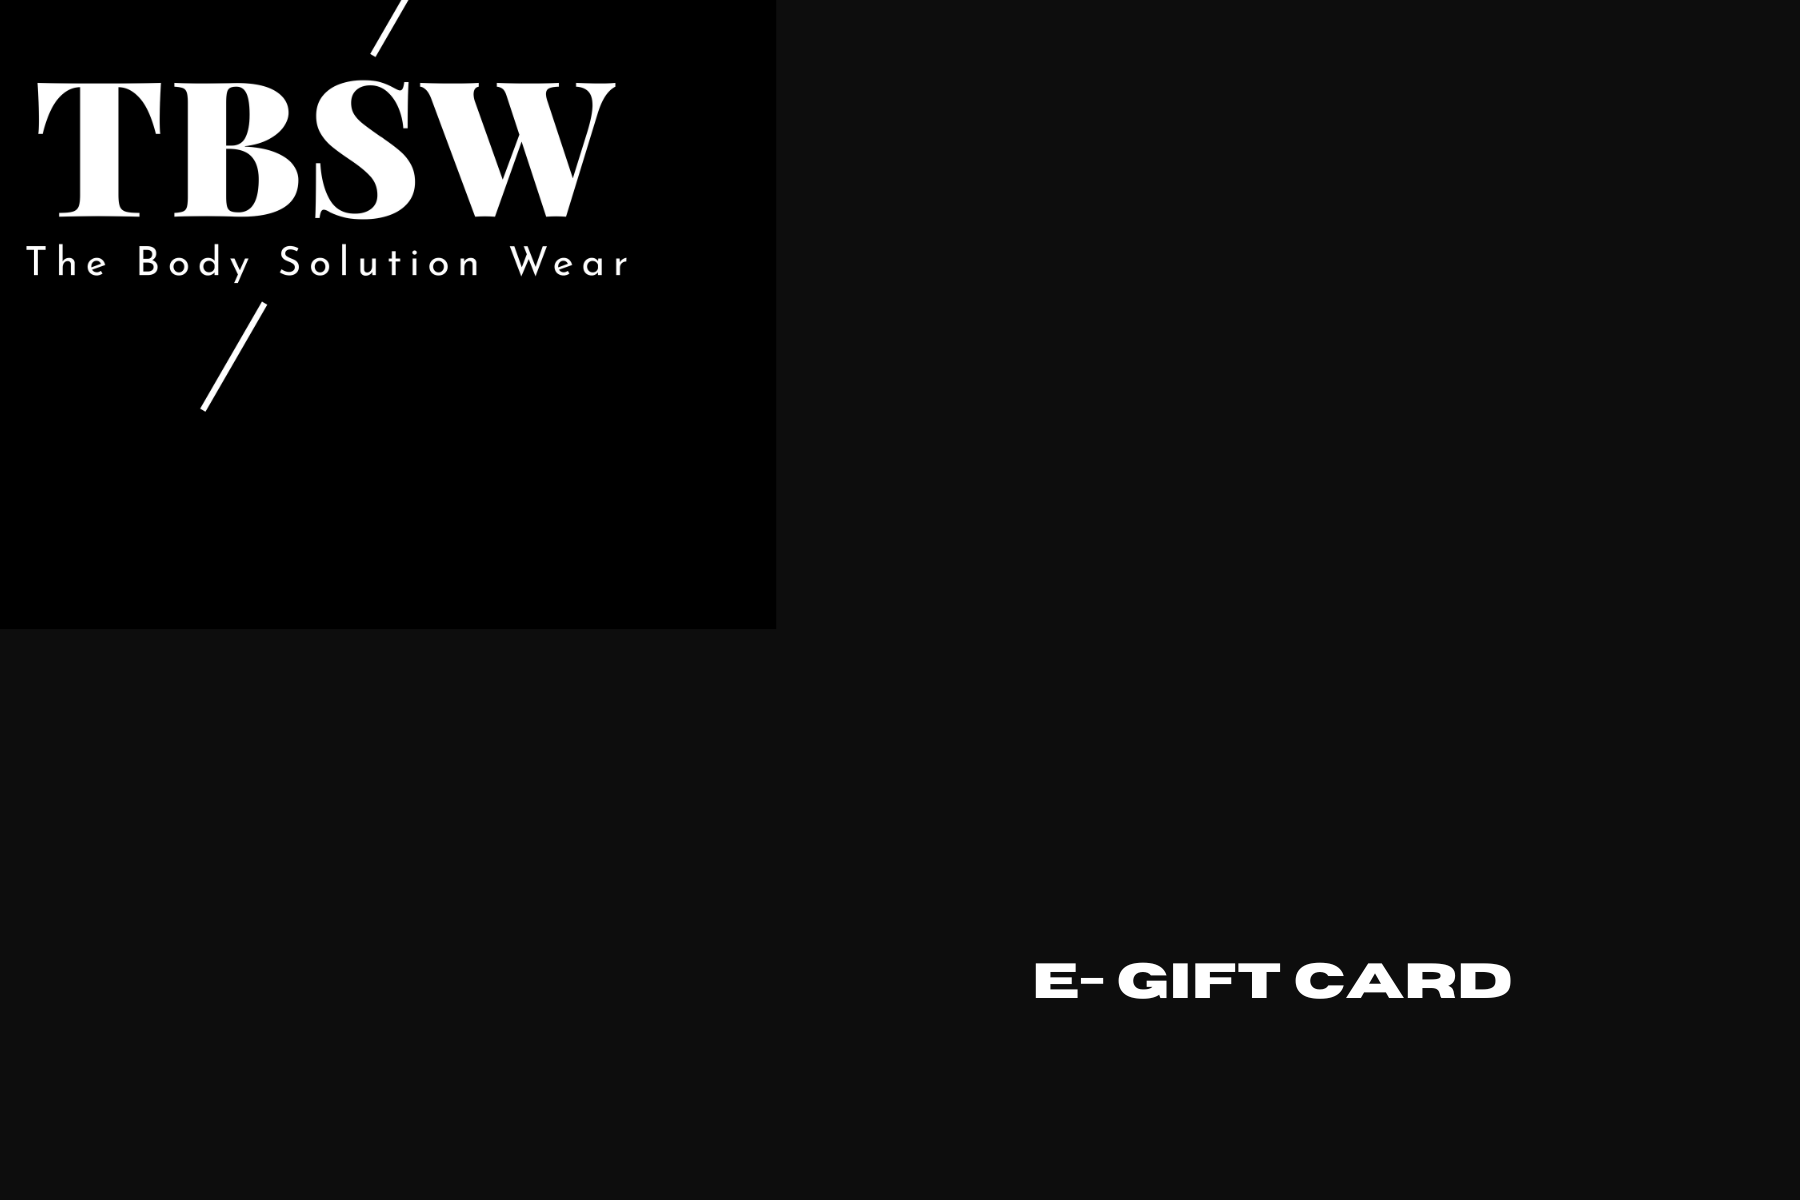 £500 GIFT CARD - TBSW